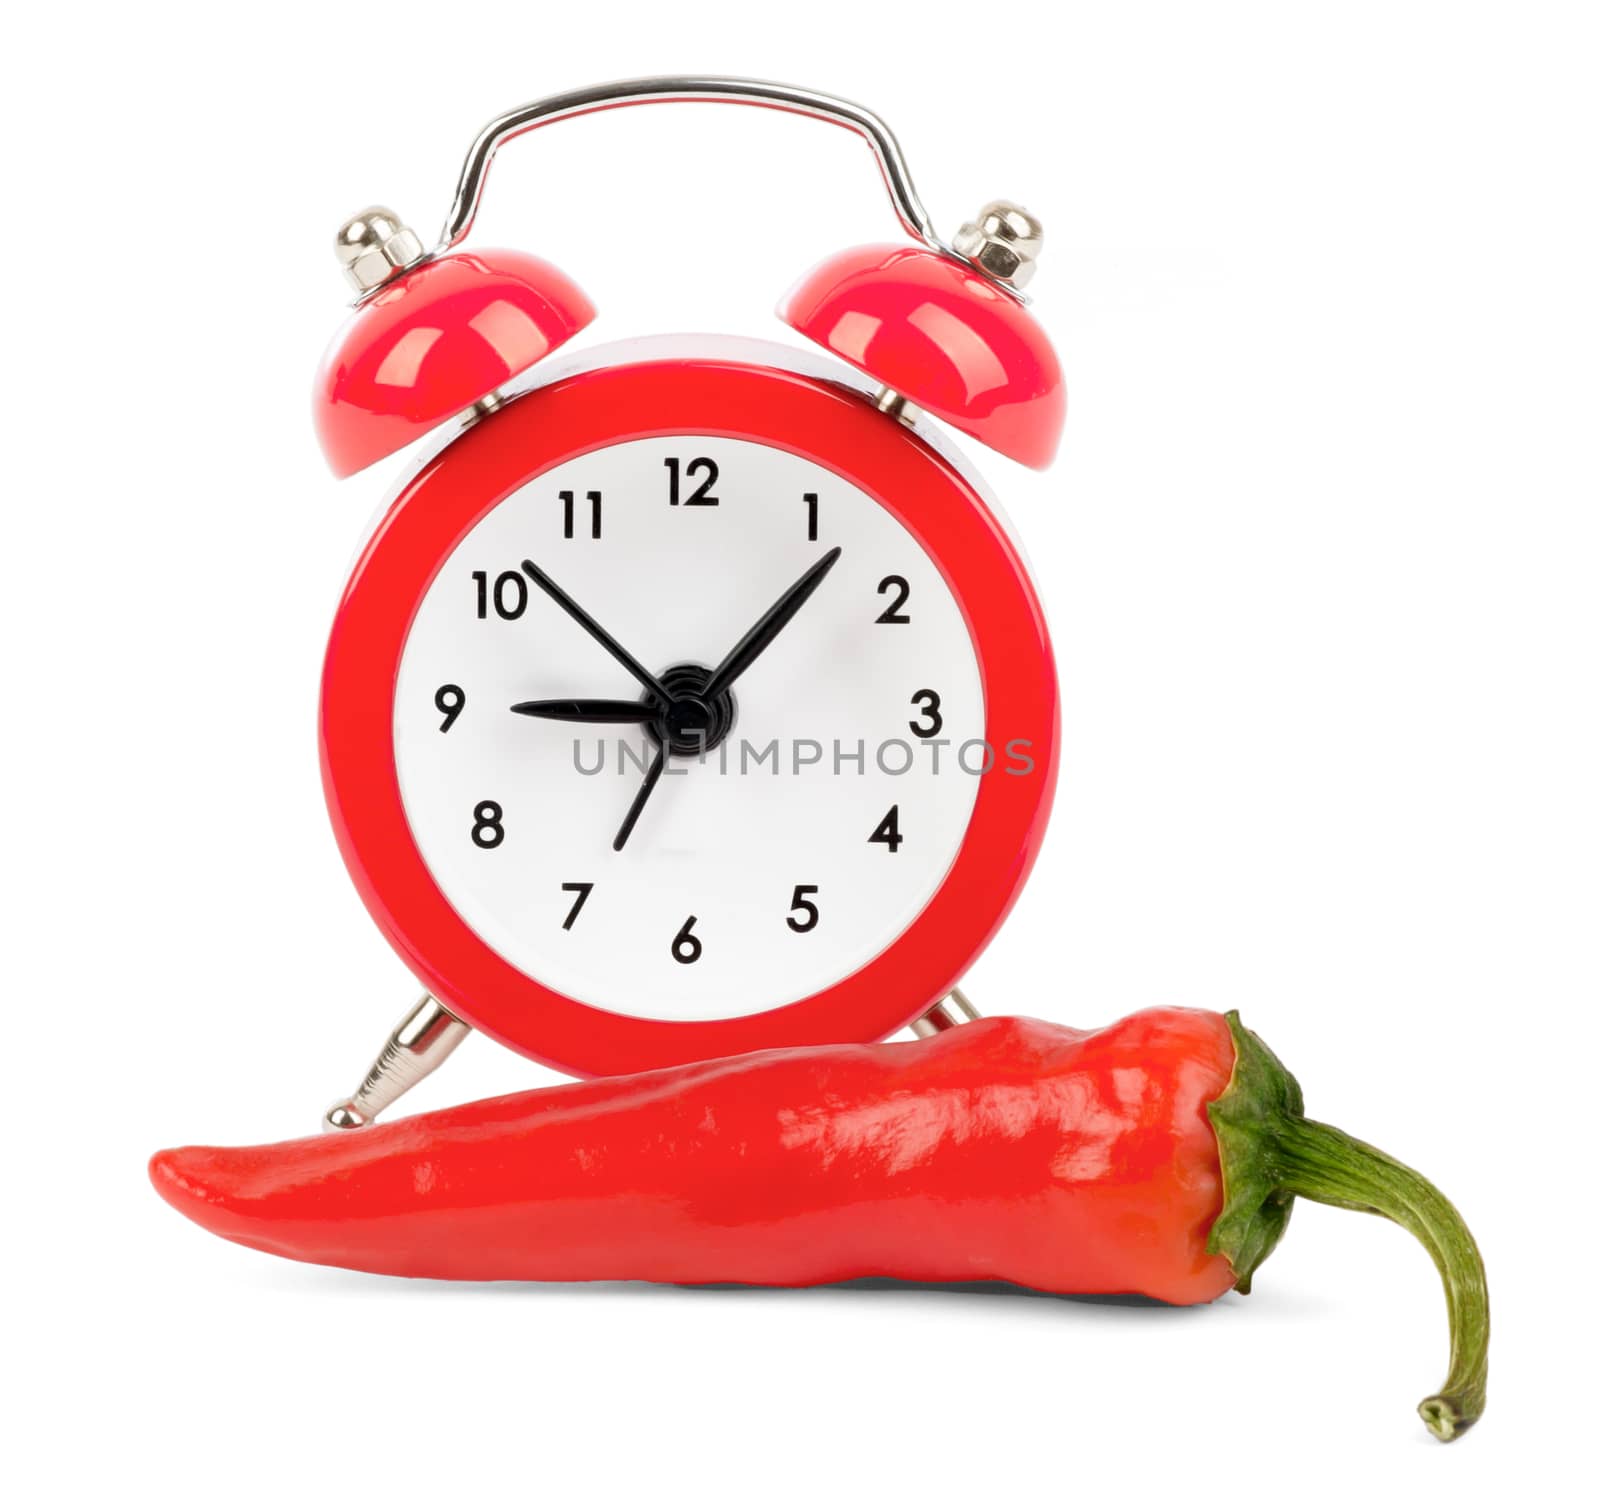 Red hot pepper with red alarm clock on isolated white background